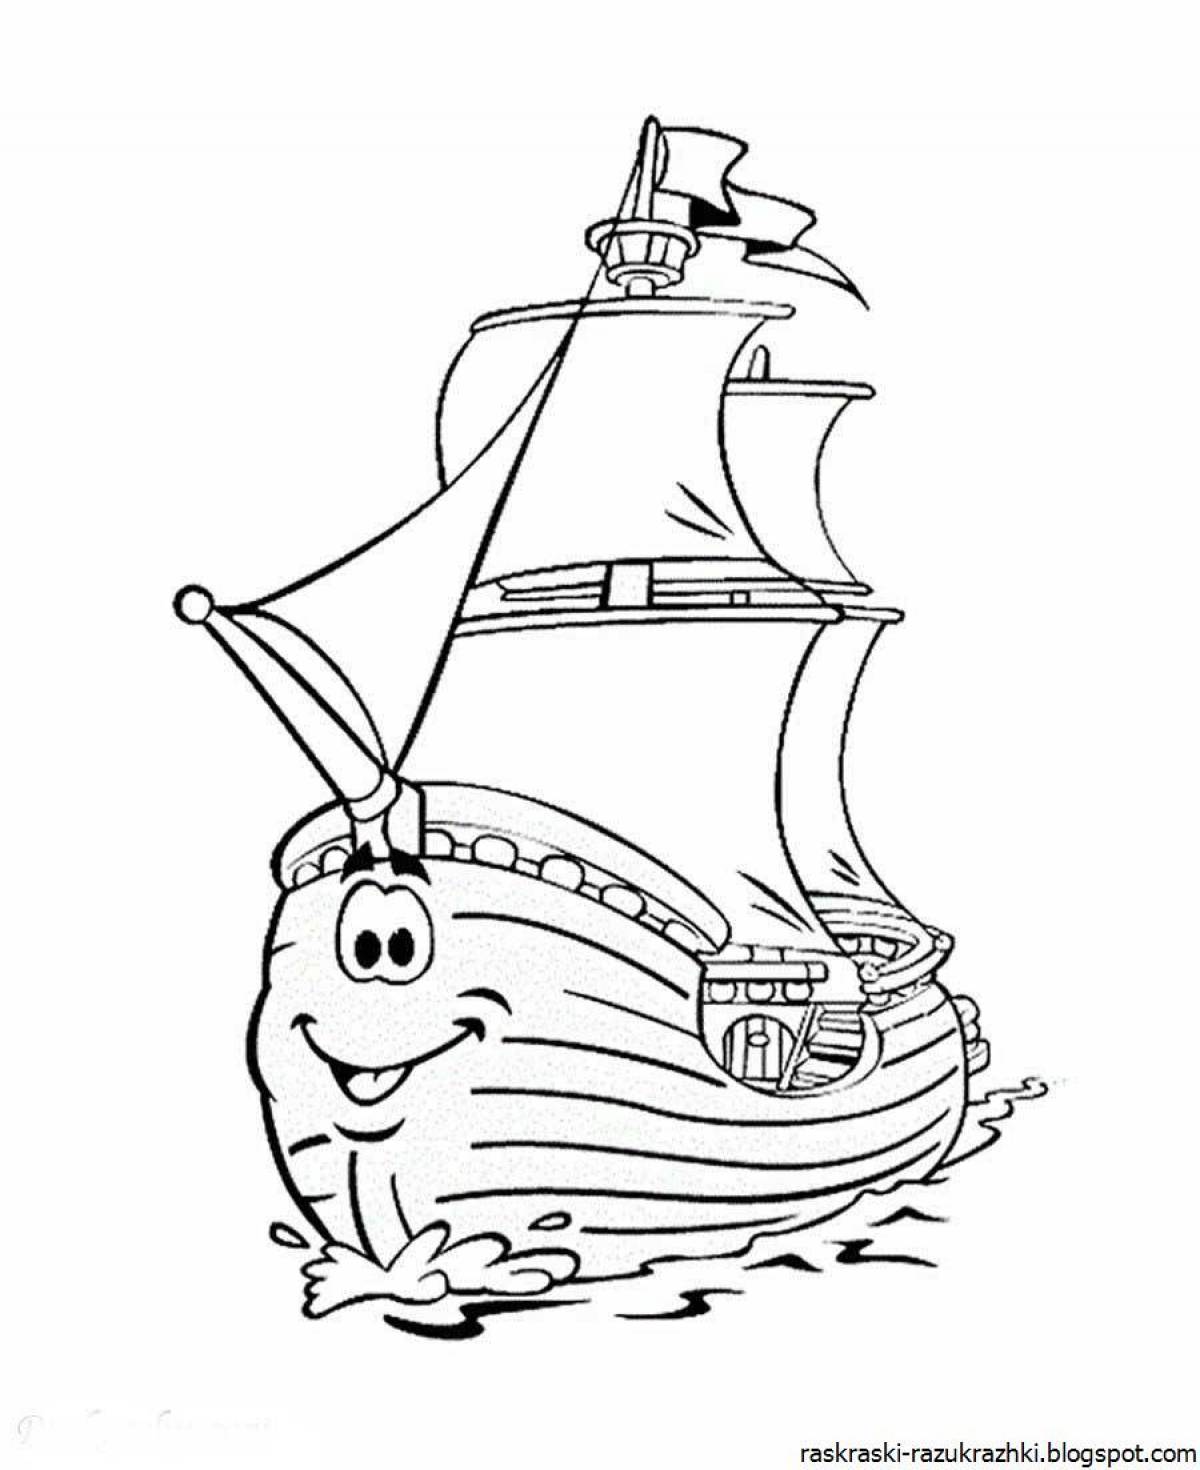 Adorable ships coloring page for kids